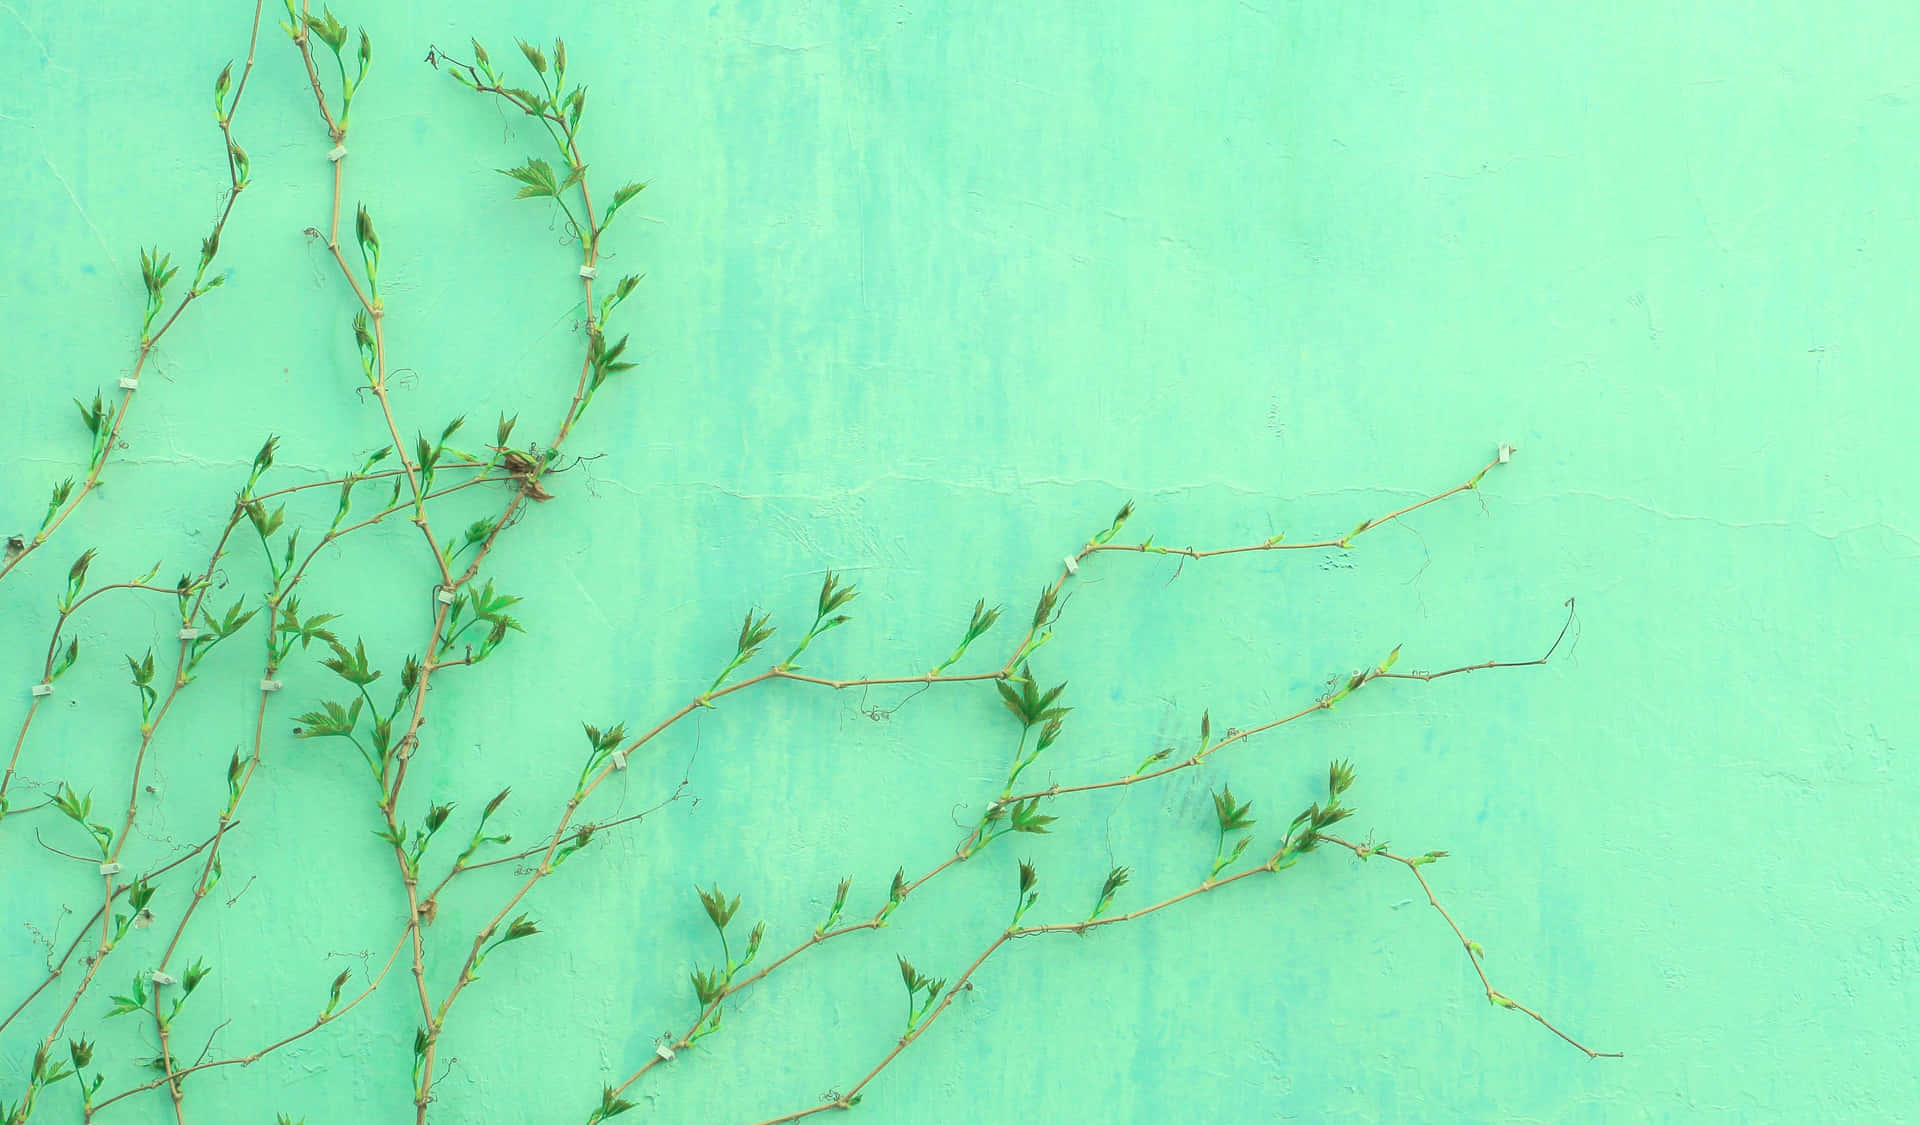 Pastel Aesthetic Green Vine Plant Pictures 4993 x 2926 Picture